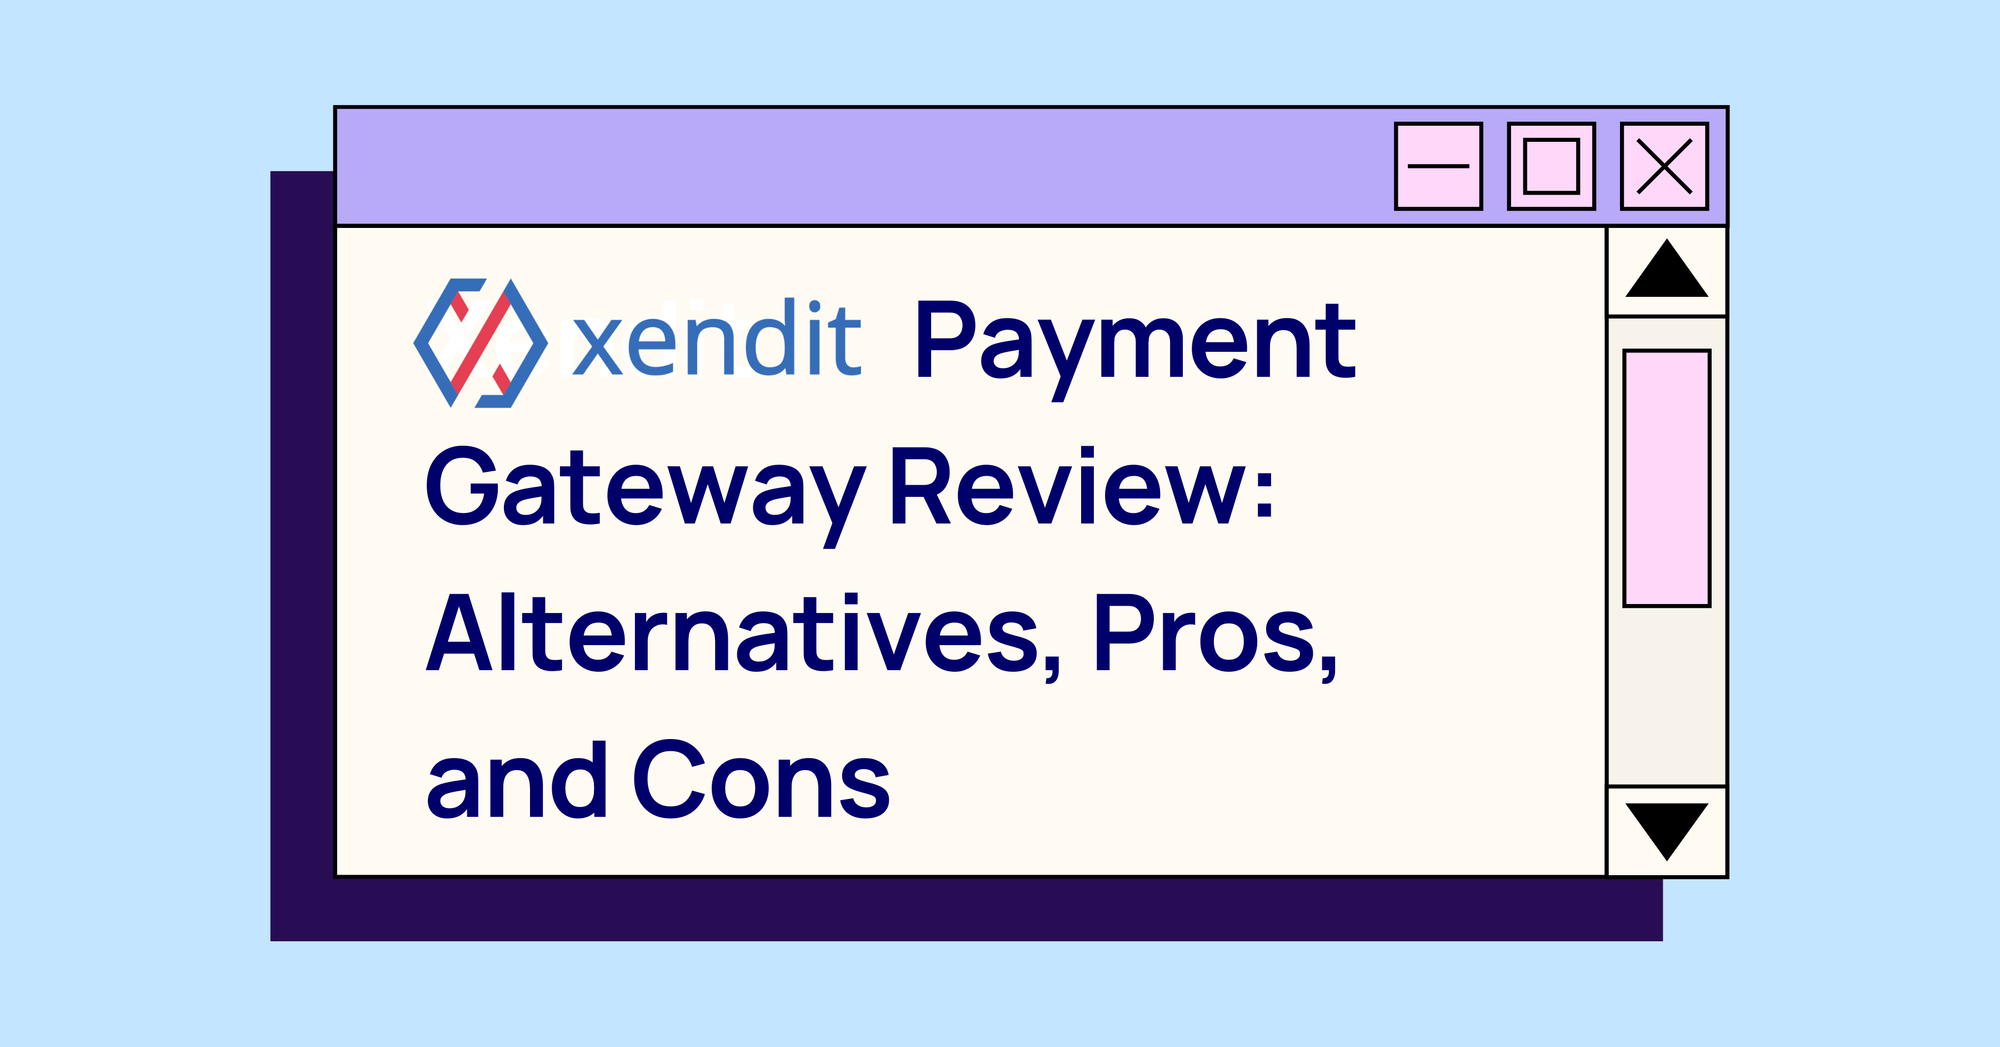 Xendit Payment Gateway Review: Alternatives, Pros, and Cons